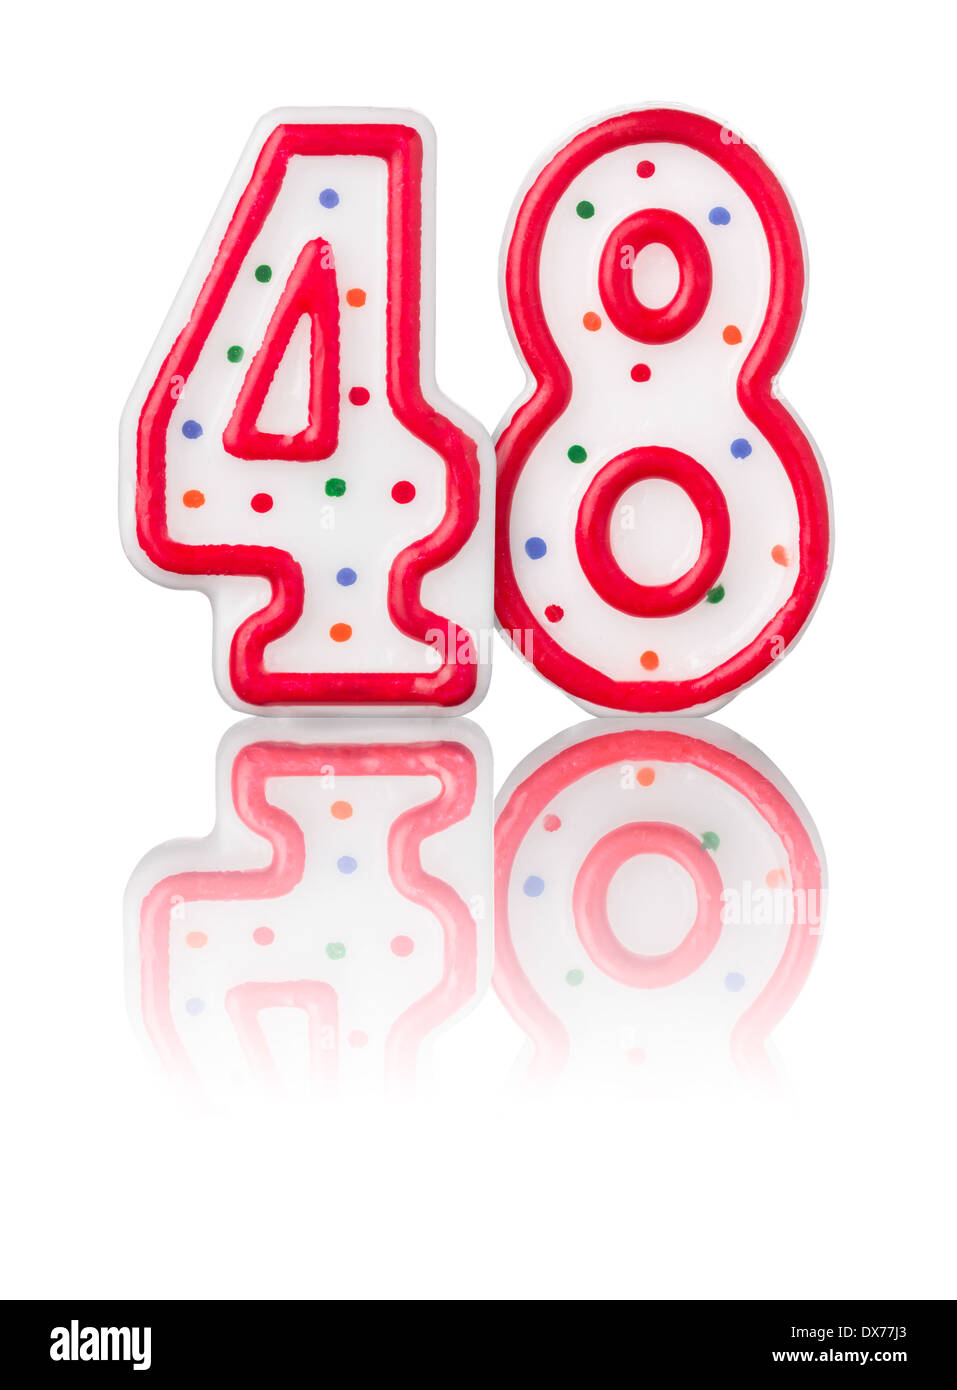 Red number 48 with reflection on a white background Stock Photo